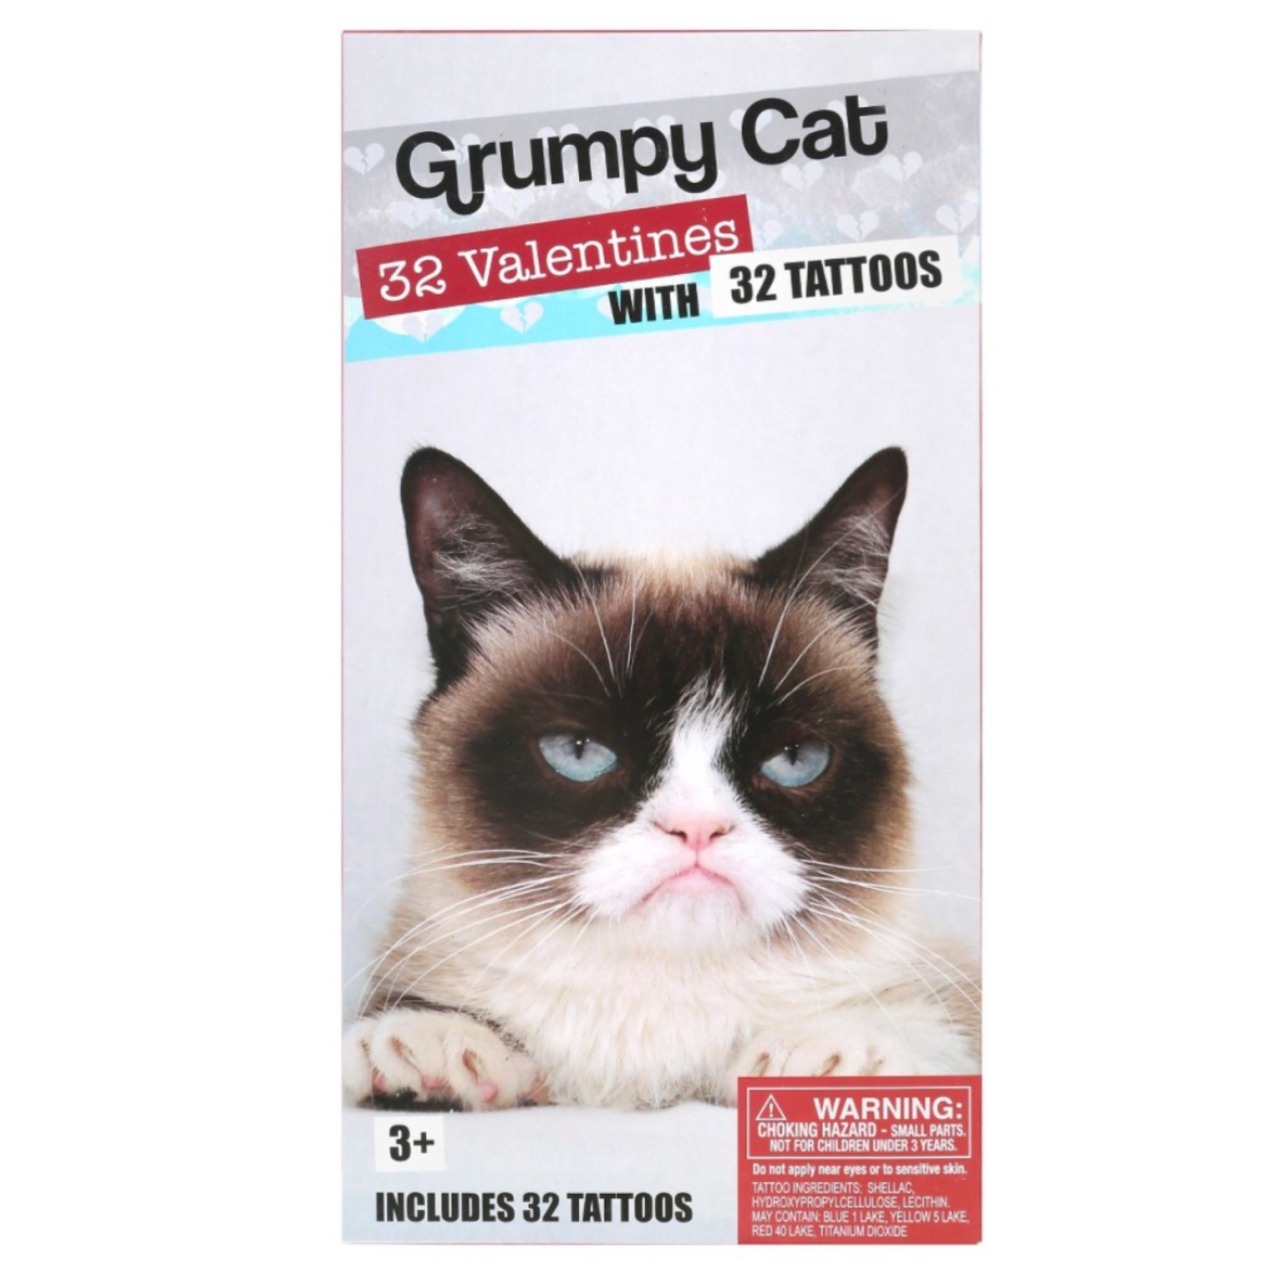 Show someone you don't care.
Grumpy Cat Valentines available now at Target 
https://grumpy.cat/GCValentines